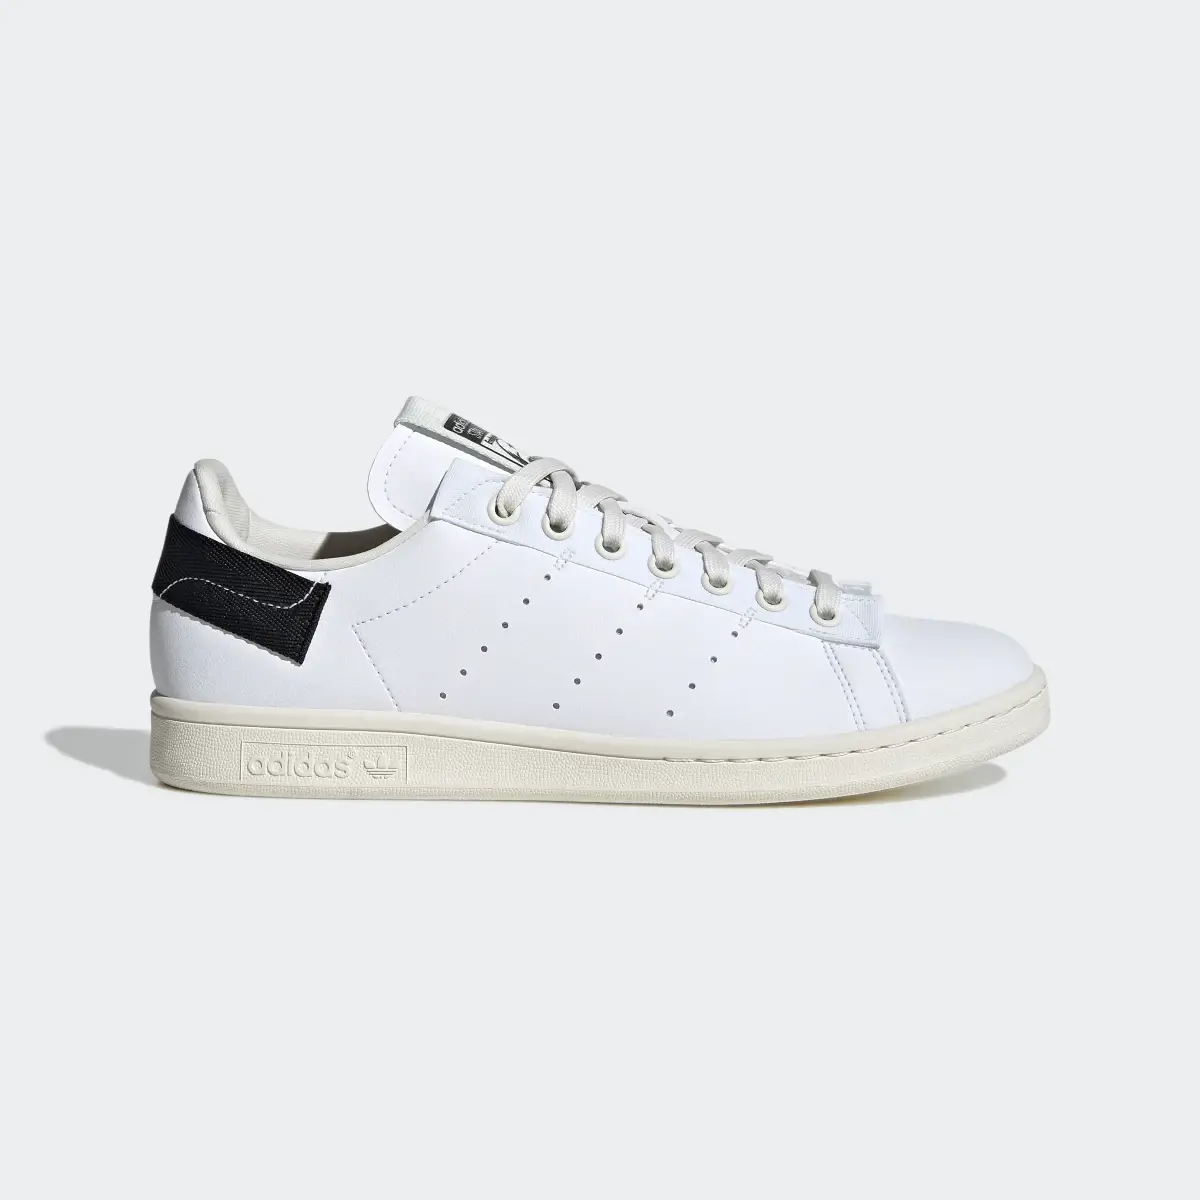 Adidas Stan Smith Parley Shoes. 2